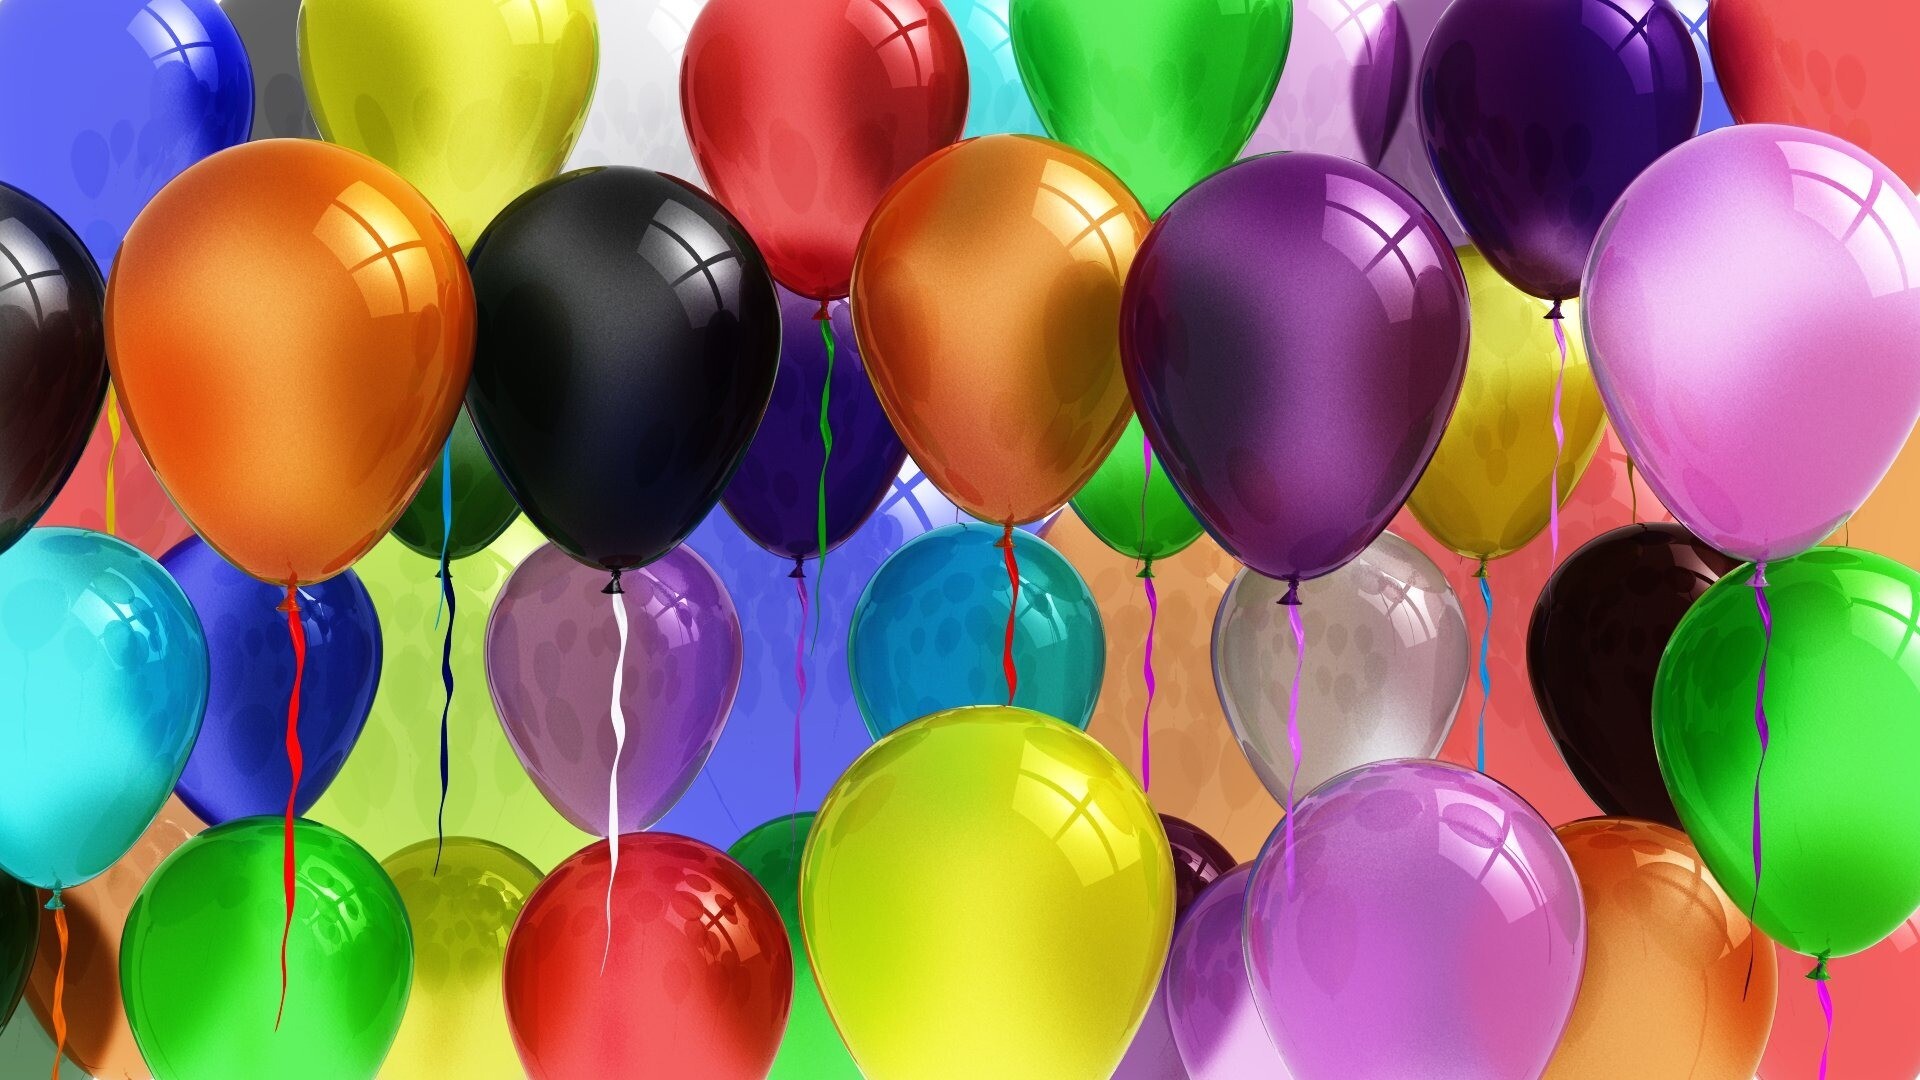 Balloons: Toy gasbags are used as decorations and advertising space. 1920x1080 Full HD Wallpaper.